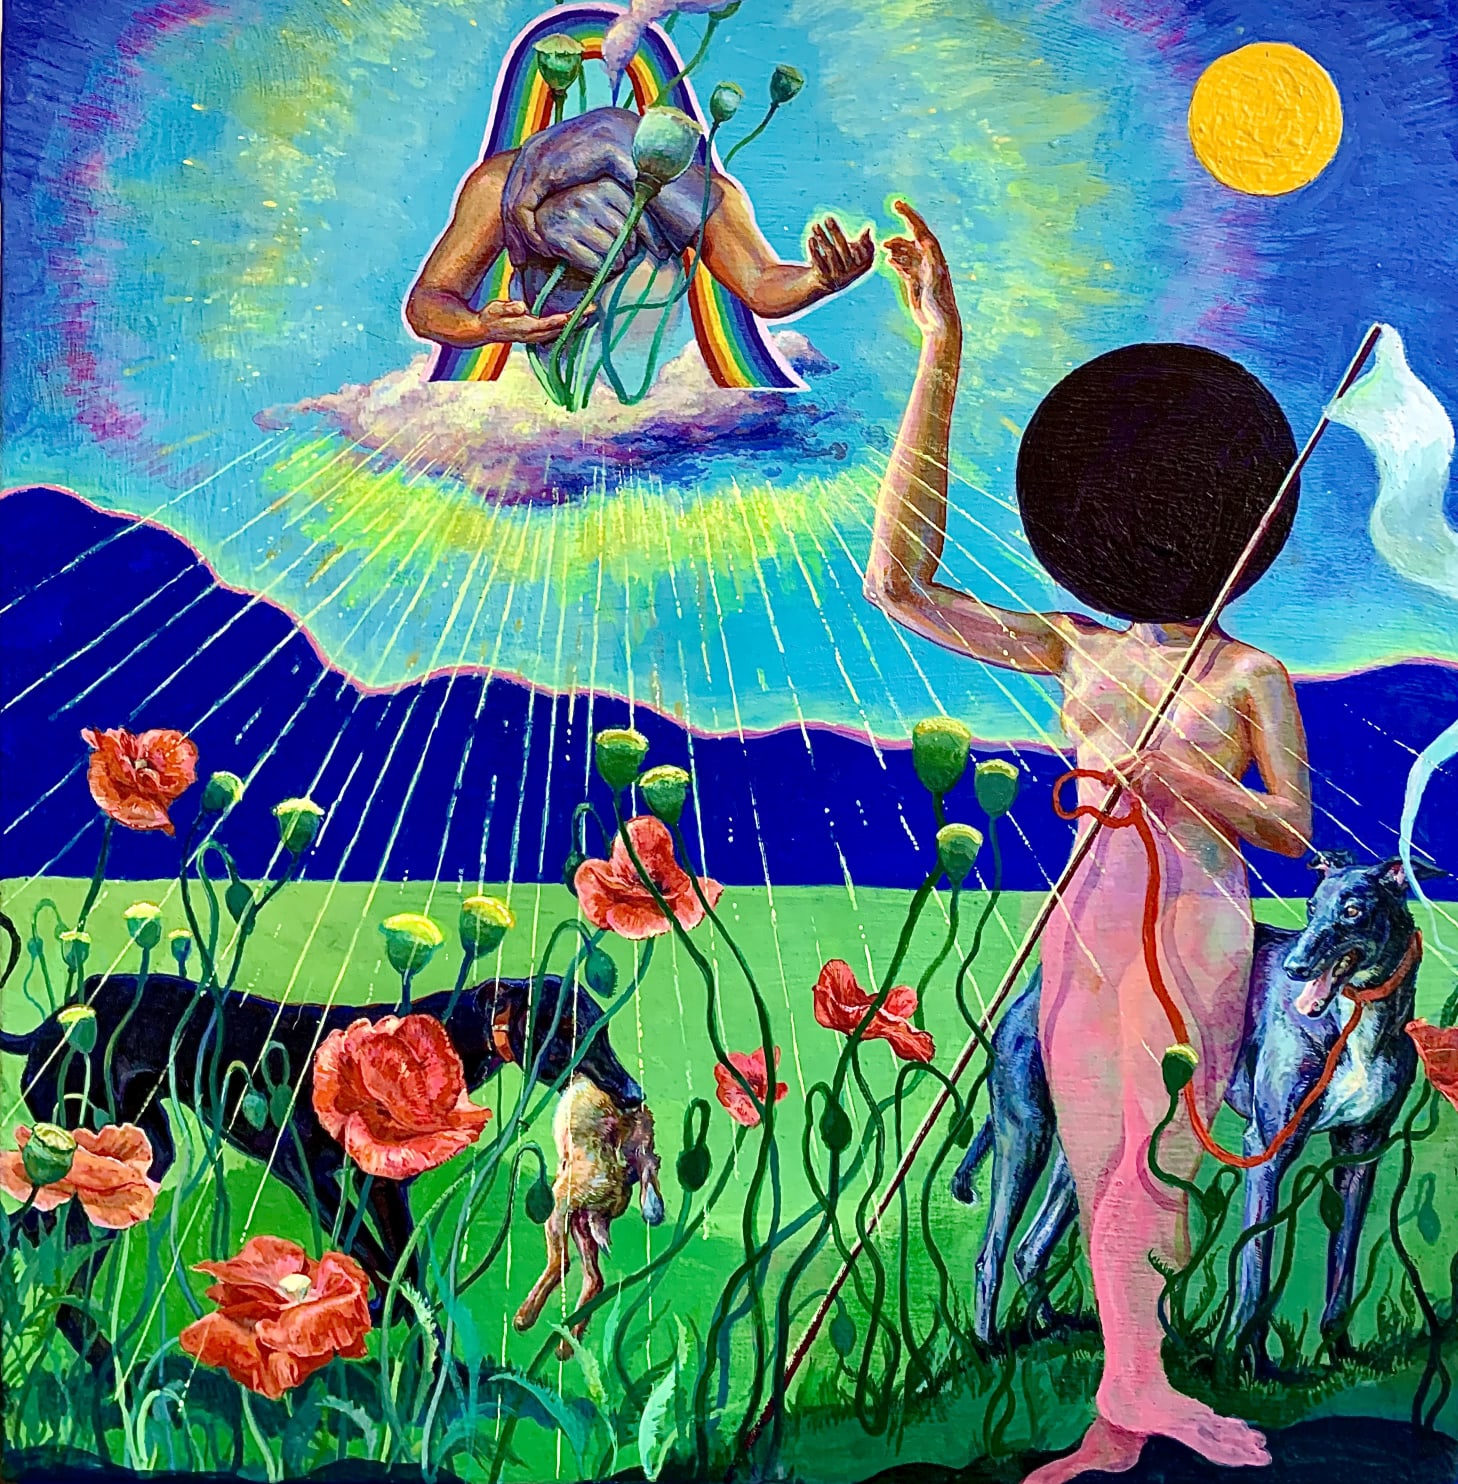 The bottom half of this scene is dominated by a bright green band of colour, from which large poppies and yellow wildflowers grow. In the foreground is a naked female figure with salmon pink, slightly translucent legs and a large black circle inplace